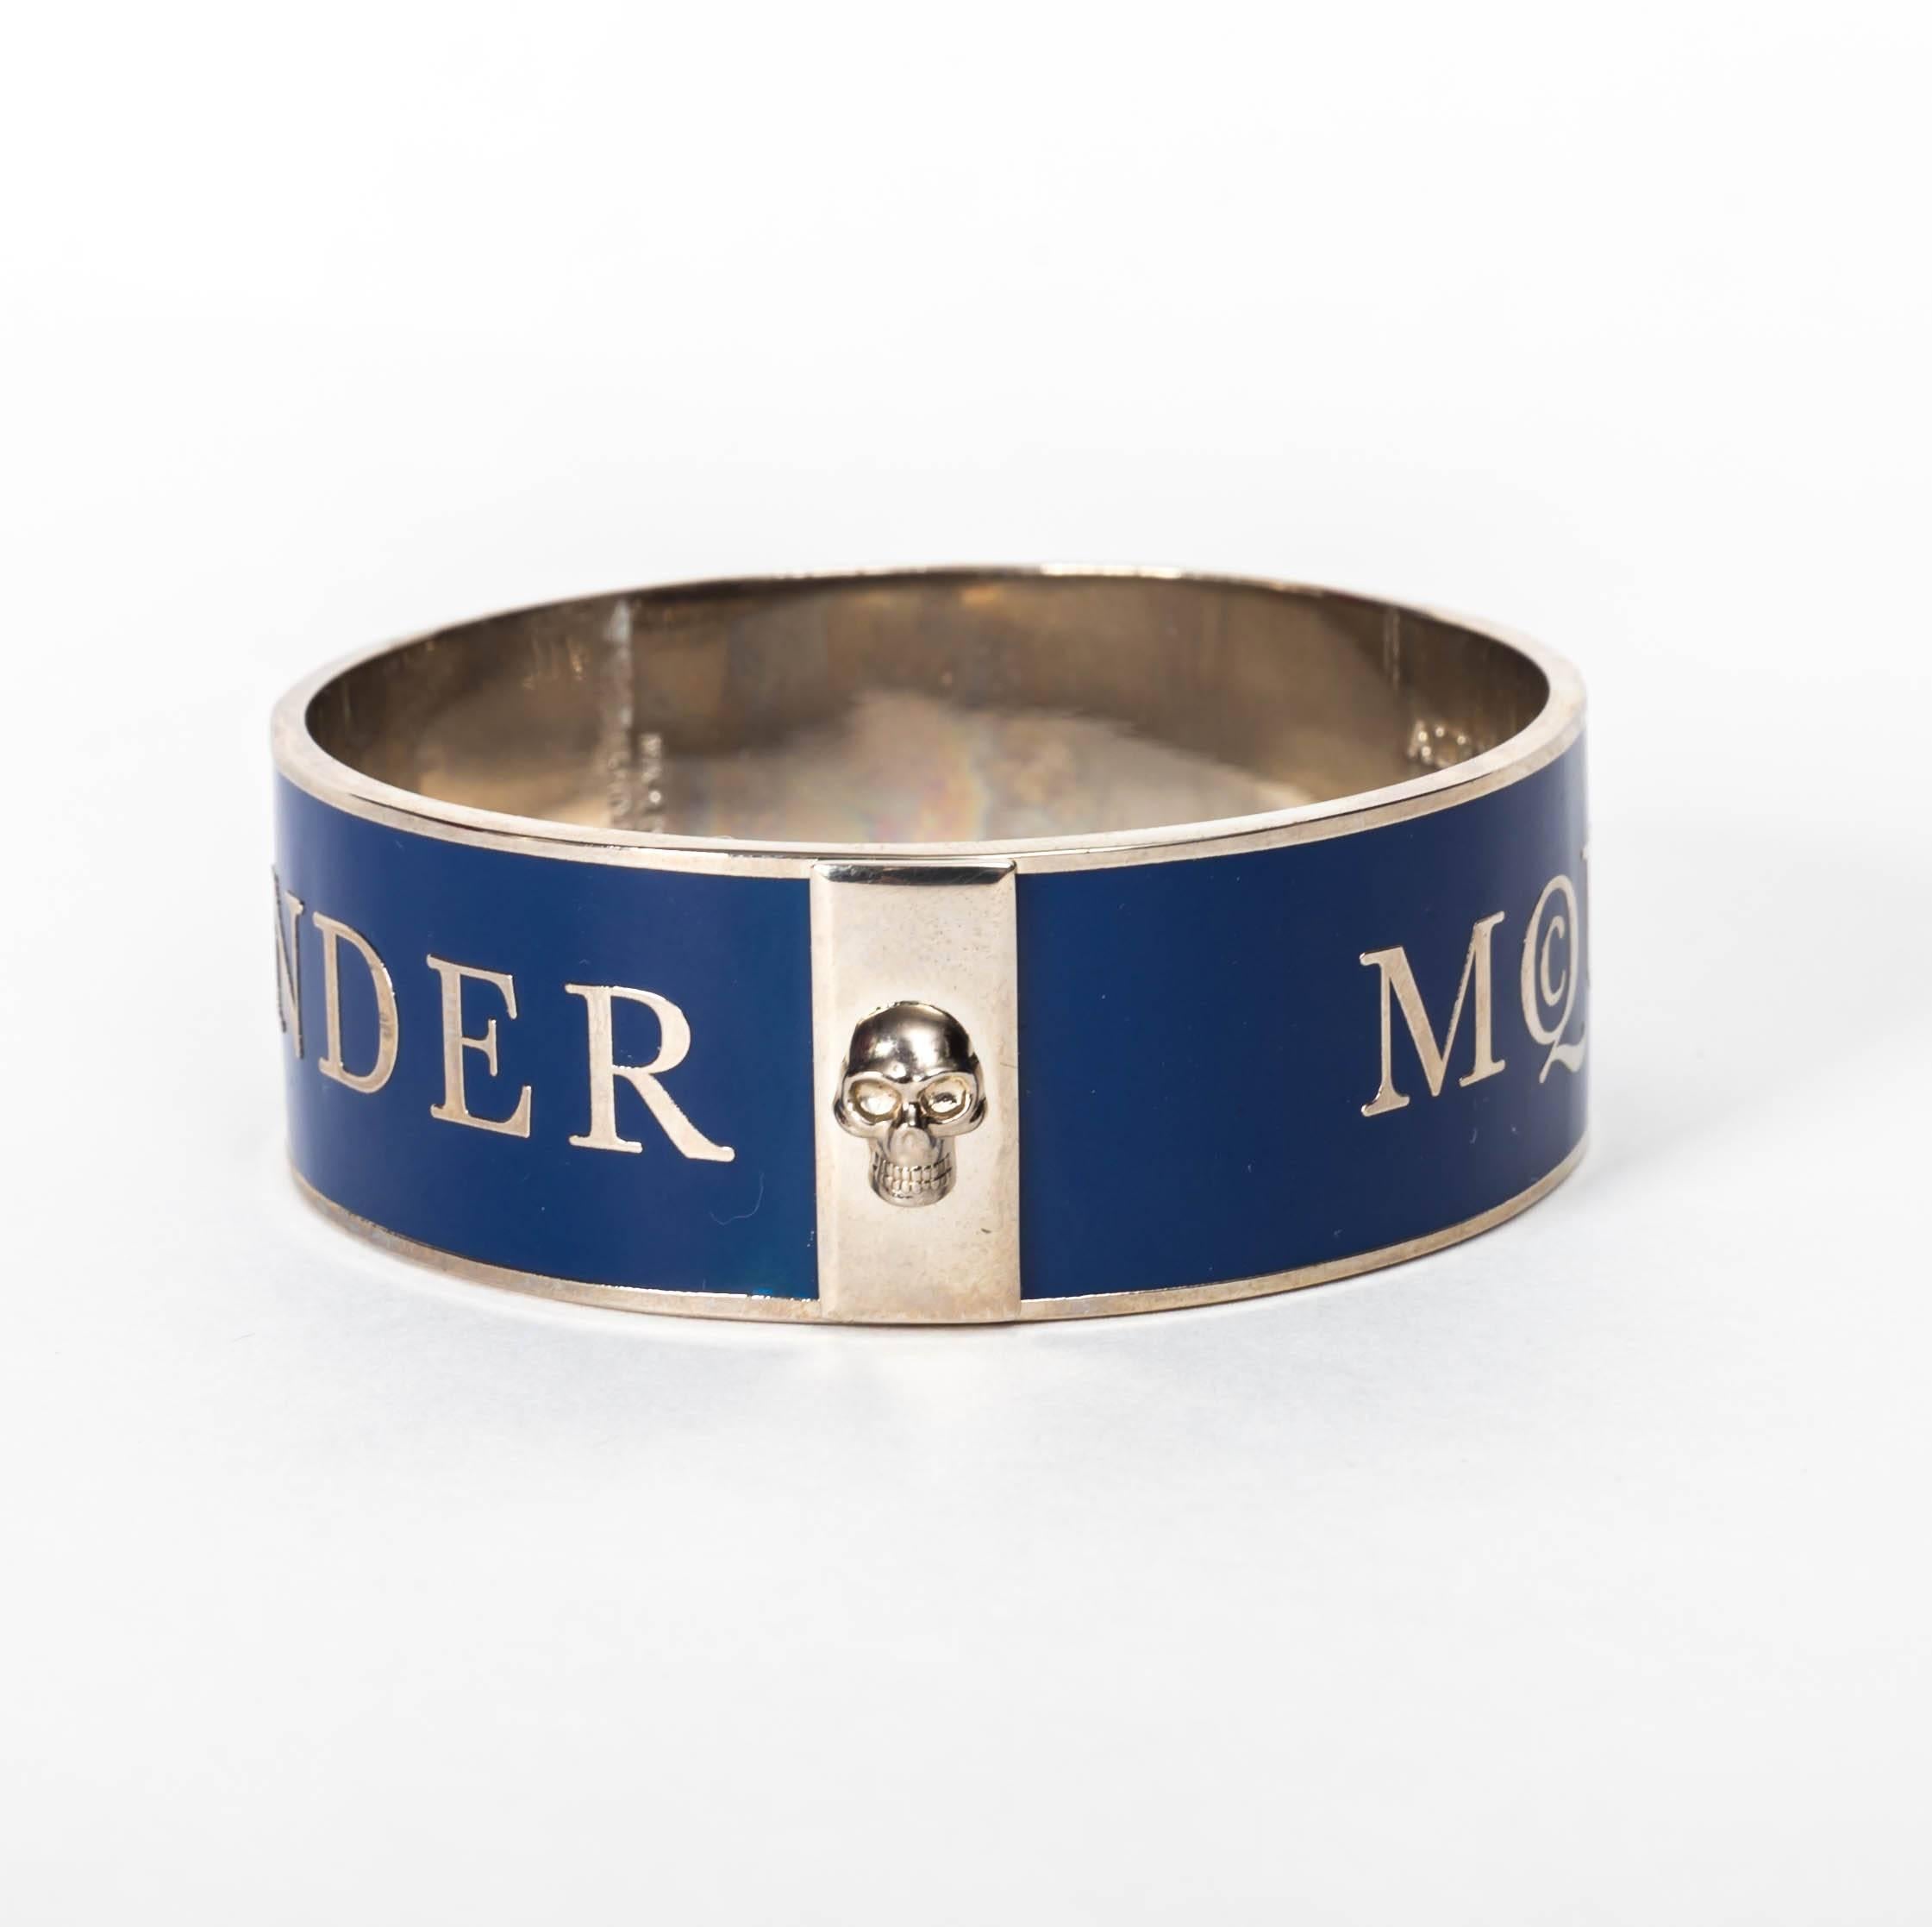 Alexander McQueen Cuff in Navy Blue With Raised Silver Lettering 2